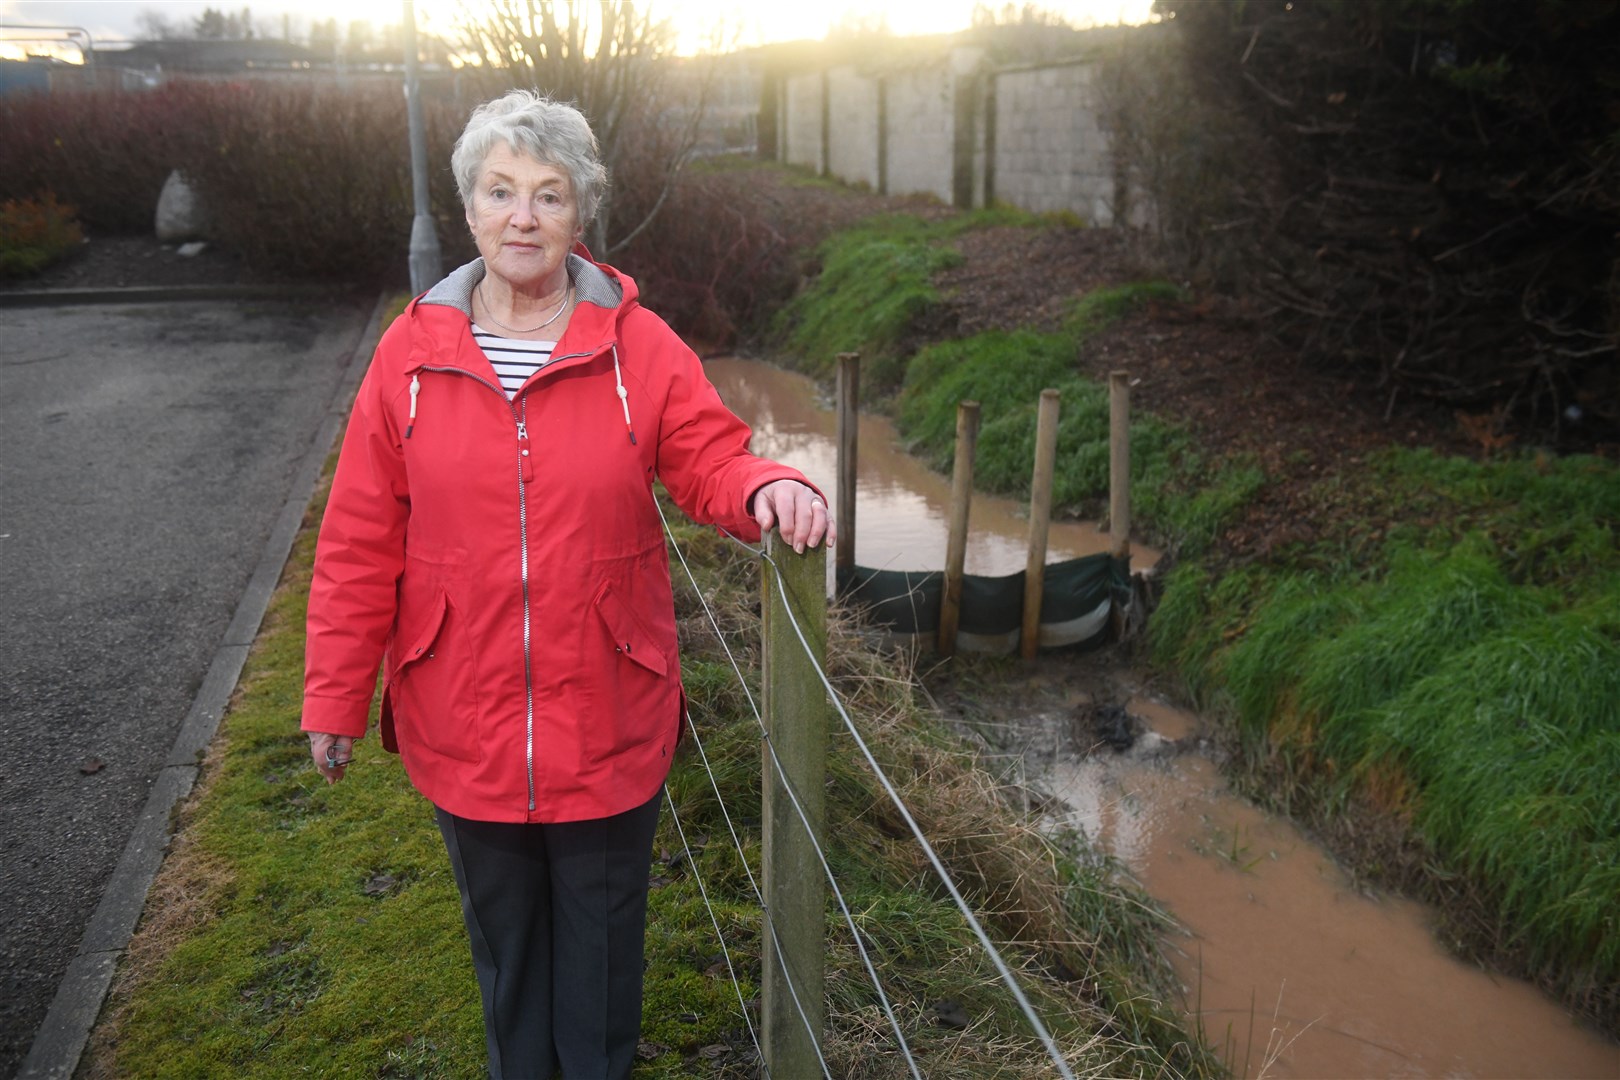 Alison Taylor has welcomed the prospect of a new school campus but says drainage arrangements must first be water tight. Picture: James Mackenzie.